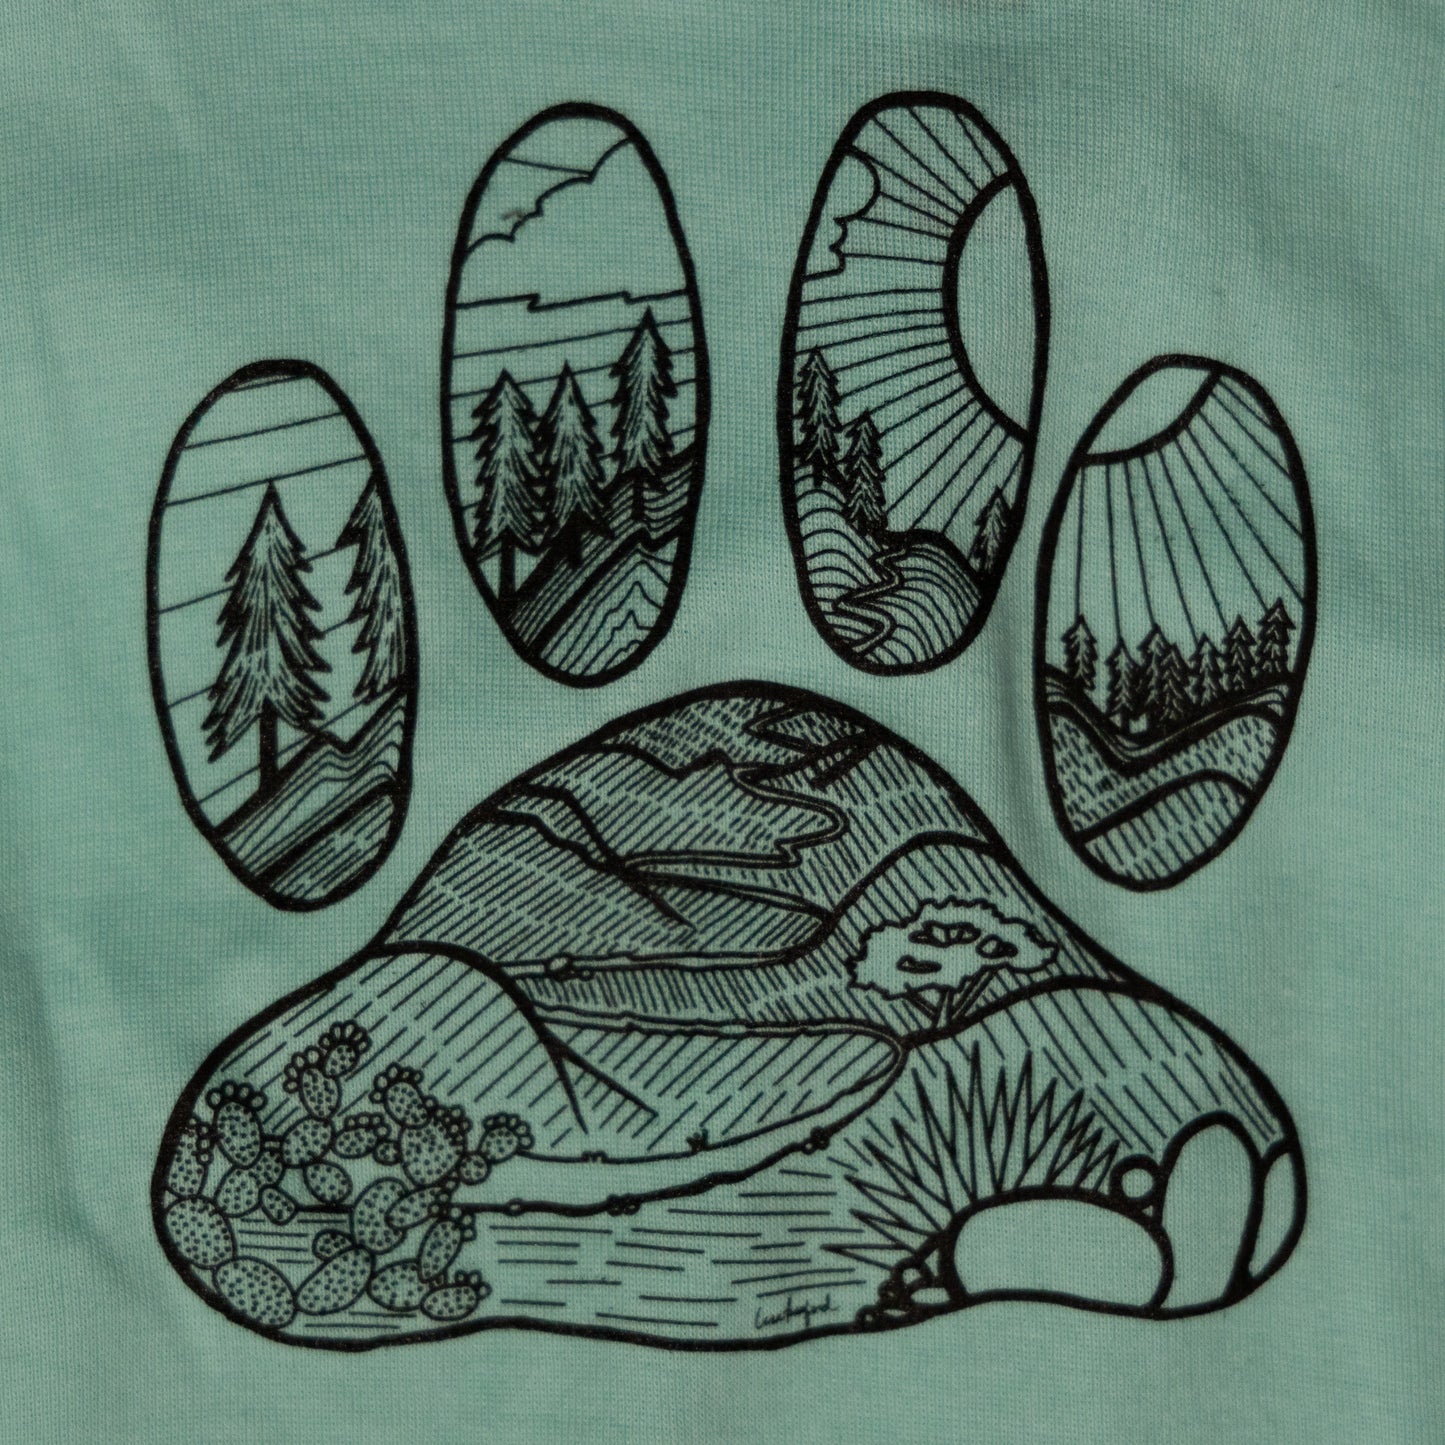 Close up of the illustrated design on the back that features a desert floor leading up to mountains with pine trees. The design is inside the shape of a dog paw print. The illustration is in black and the shirt color is light blue.